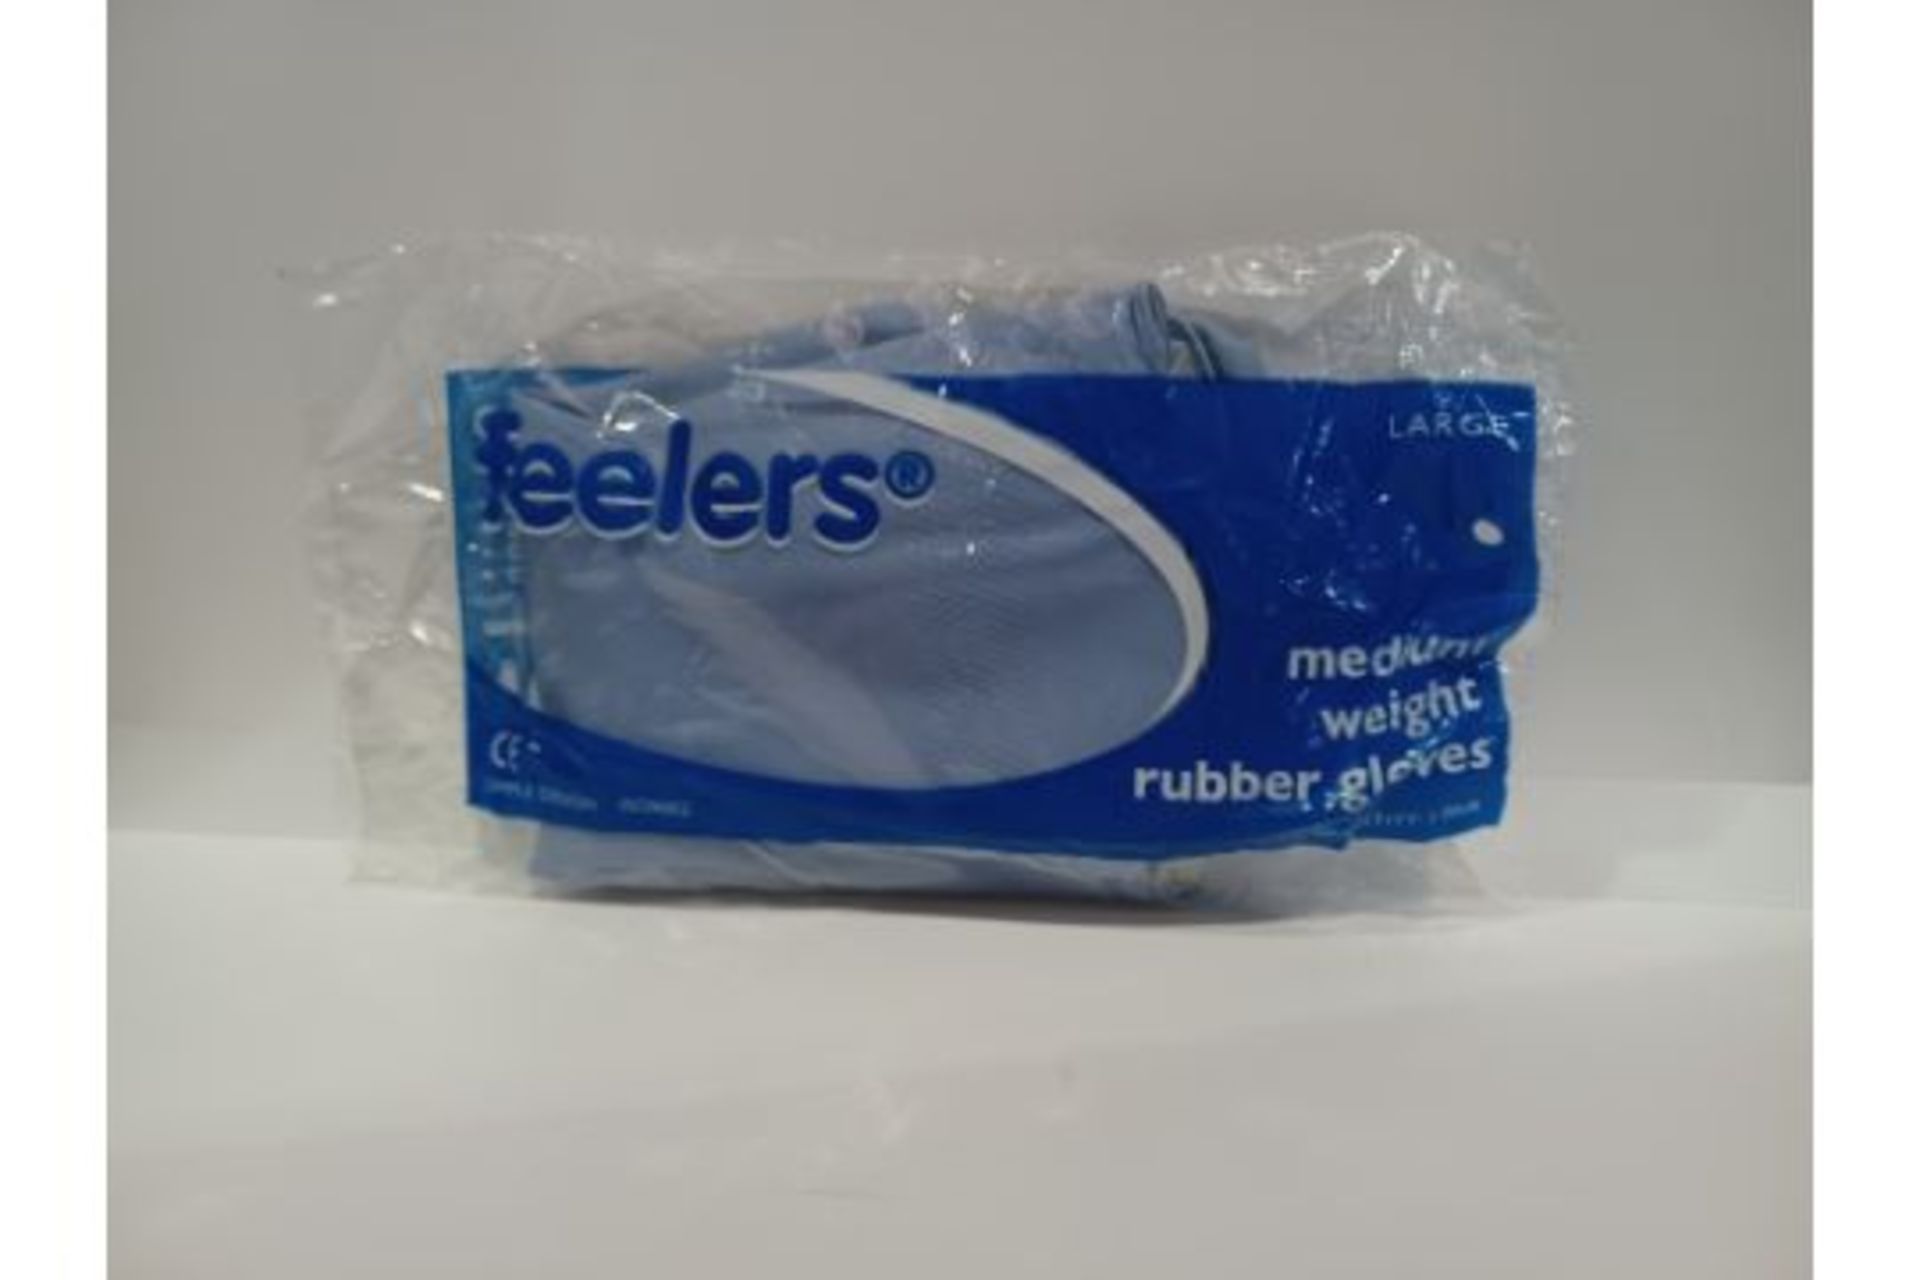 120 X NEW PACKAGED PAIRS OF FEELERS MEDIUM WEIGHT RUBBER GLOVES. SIZE MEDIUM. (ROW6RACK)